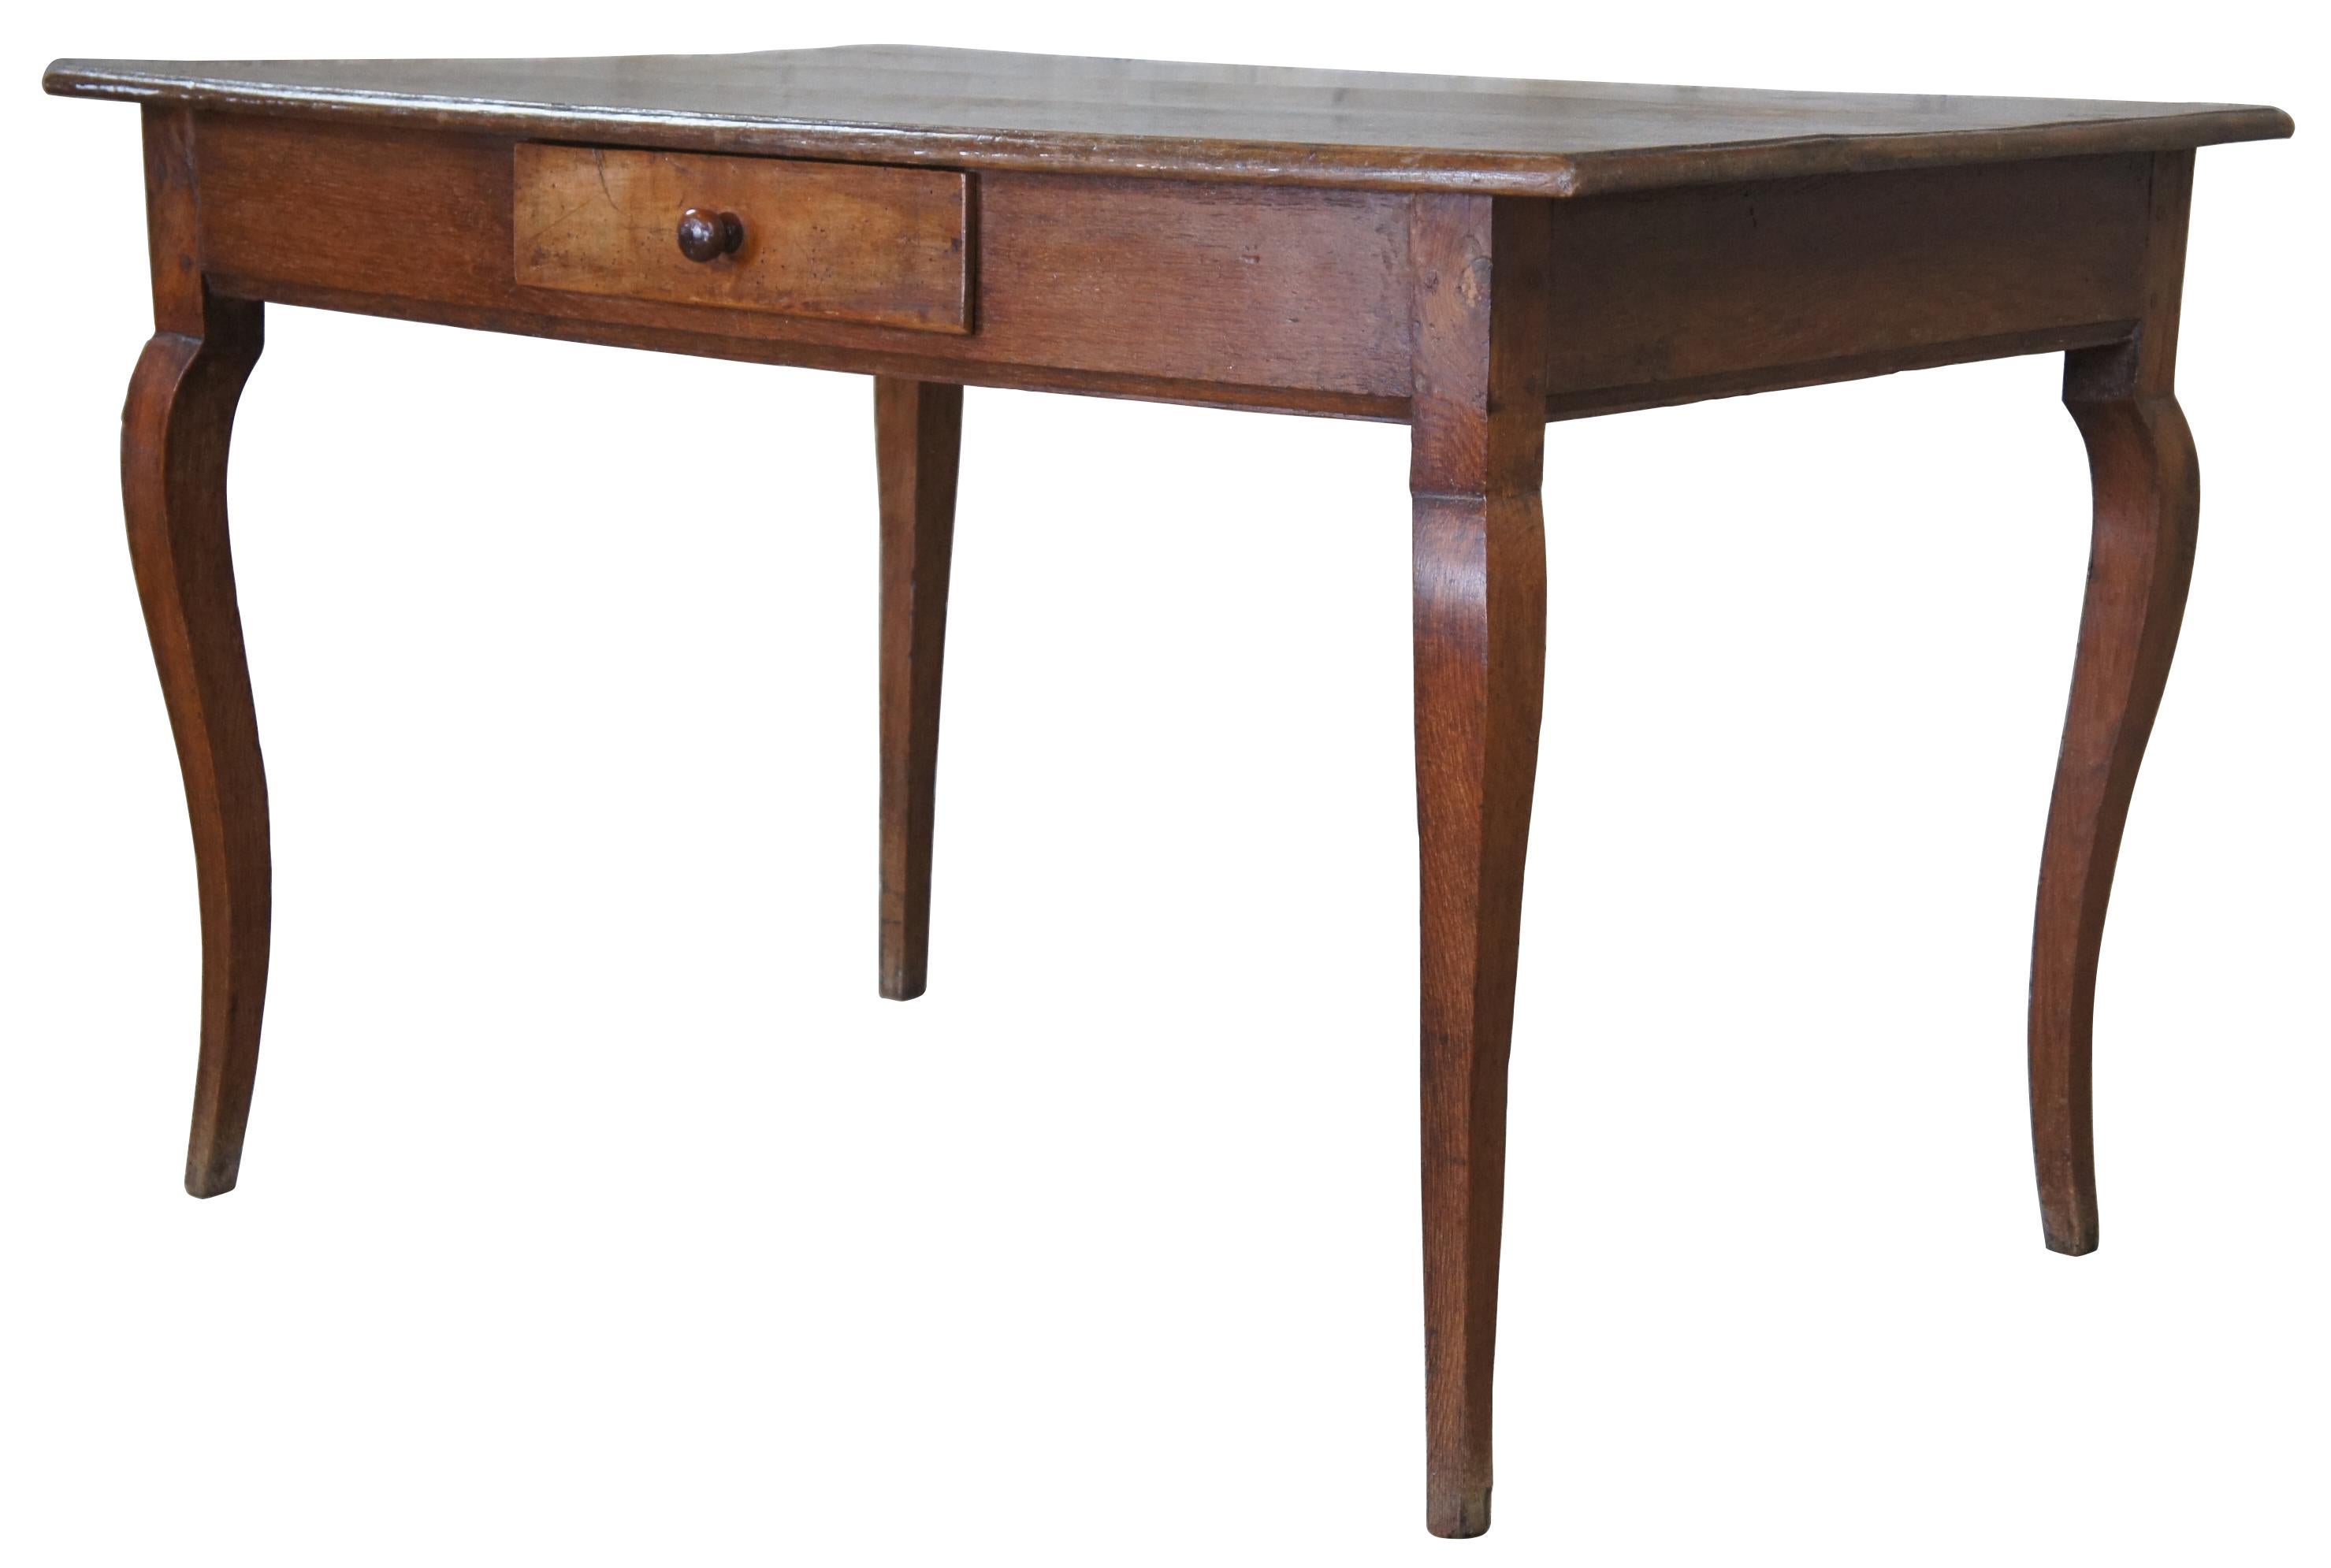 Early 20th century French Country writing desk. Made from oak with a rectangular form featuring a central drawer and cabriole legs. 
 